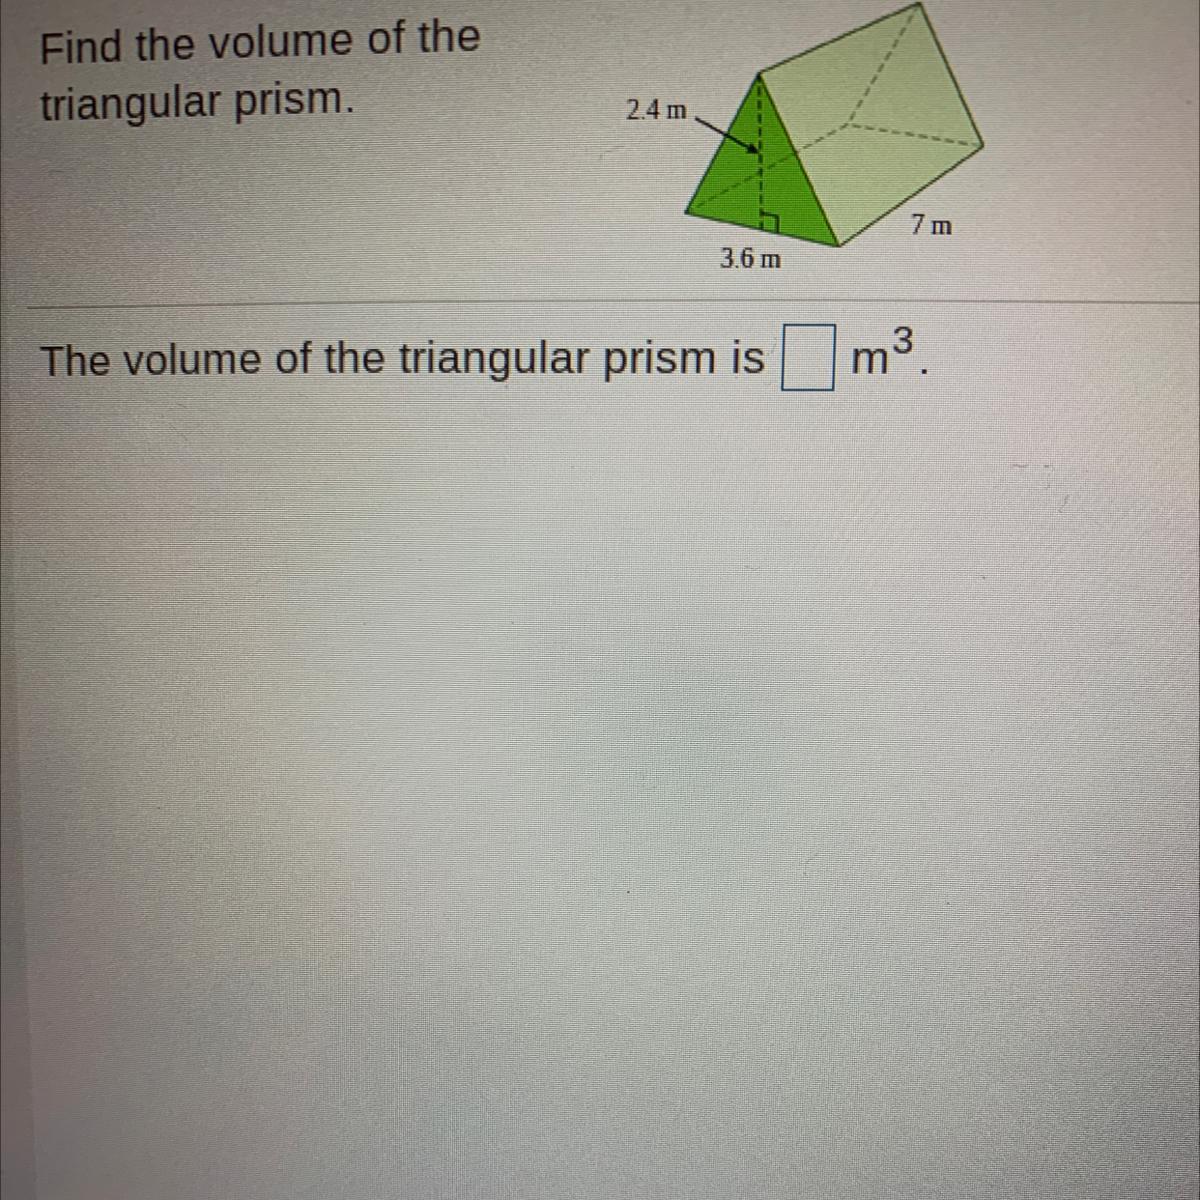 Find The Volume Of Thetriangular Prism.24 M7 M3.6 MThe Volume Of The Triangular Prism Ism3